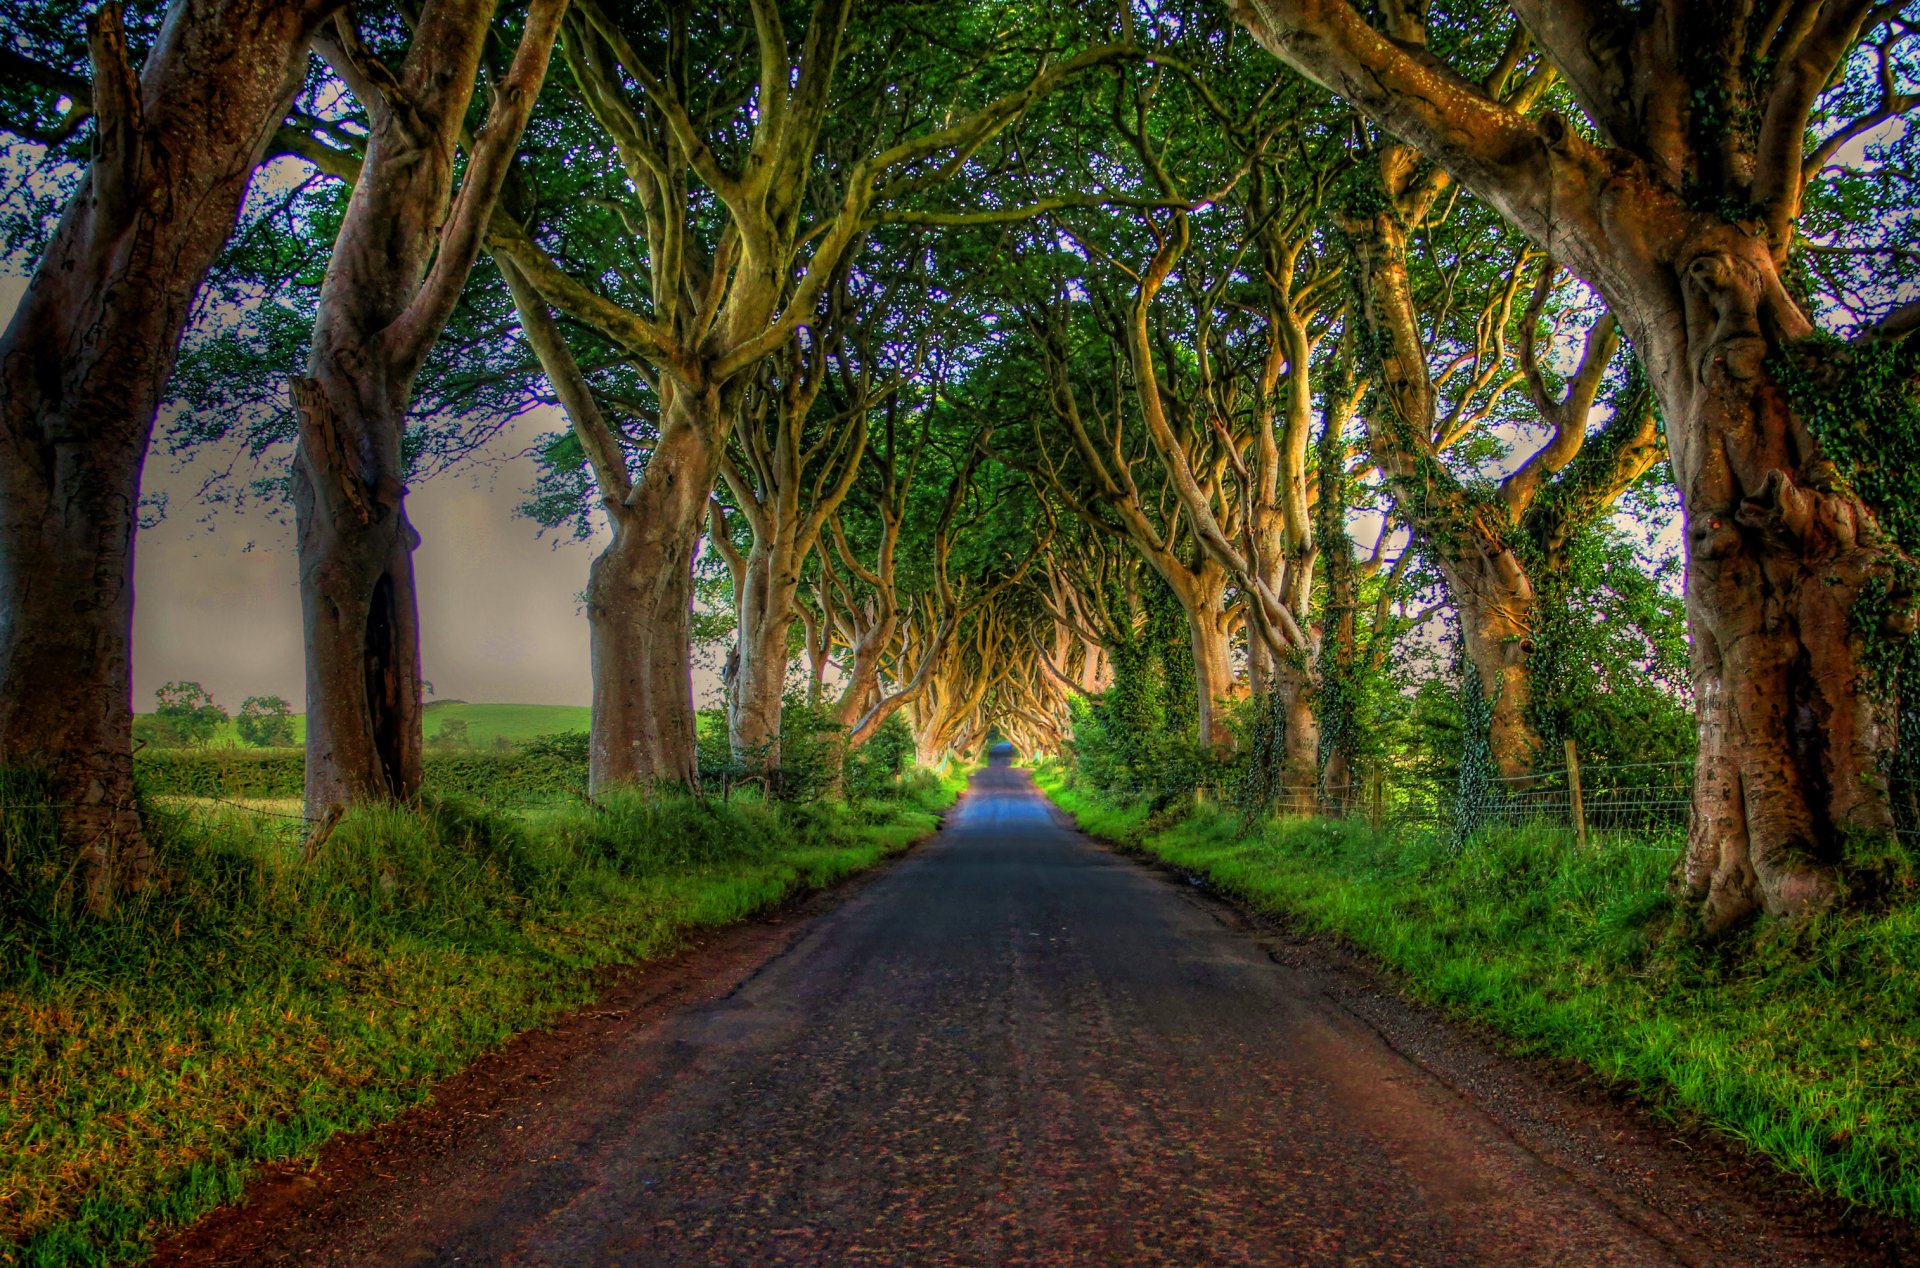 Road Lined with Trees